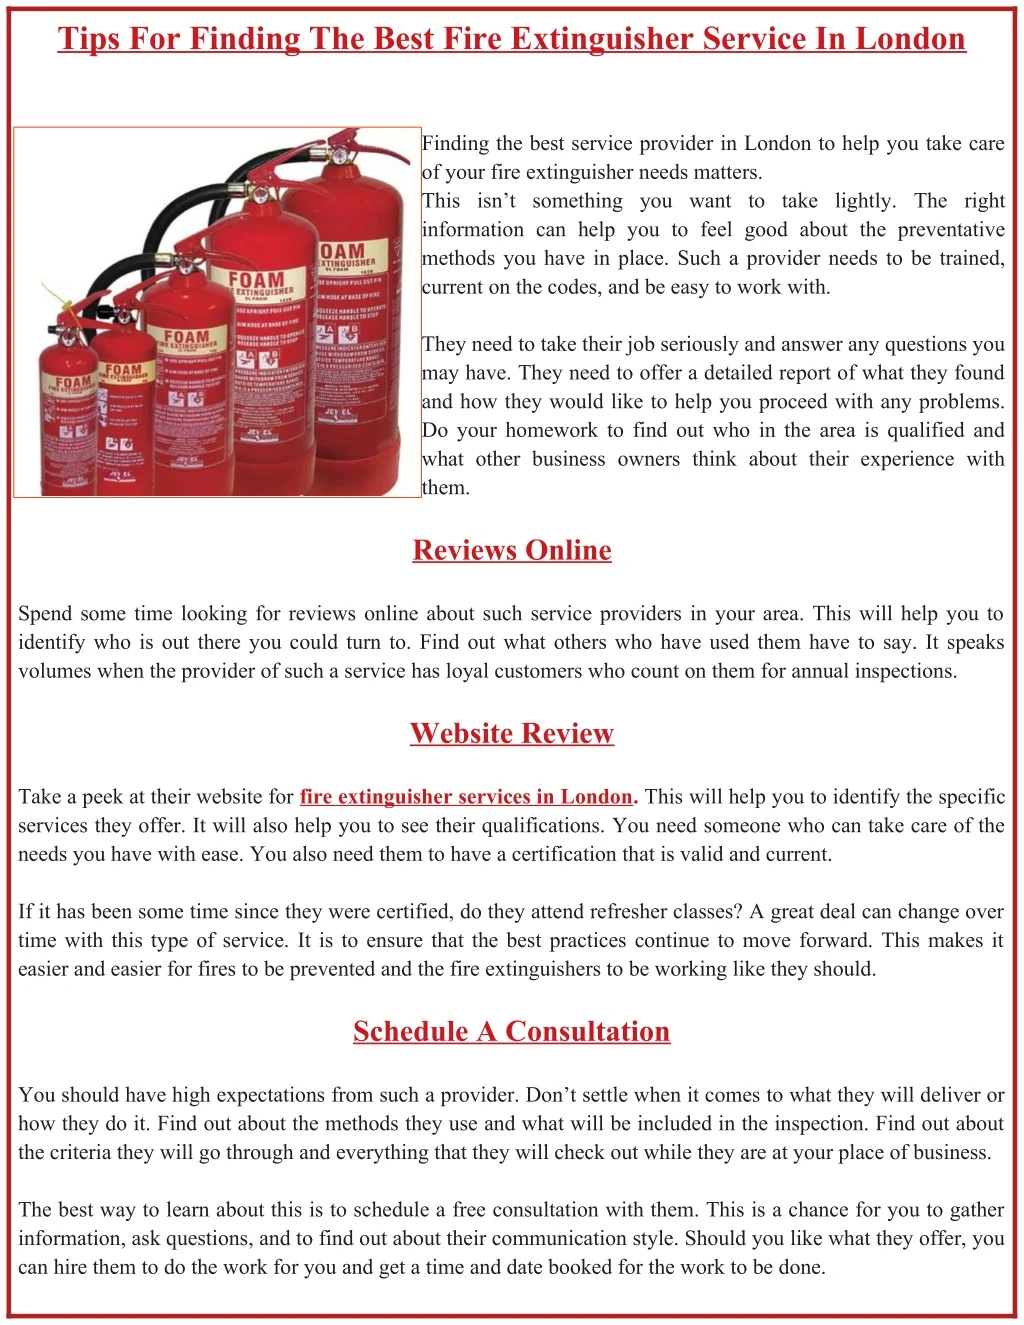 tips for finding the best fire extinguisher